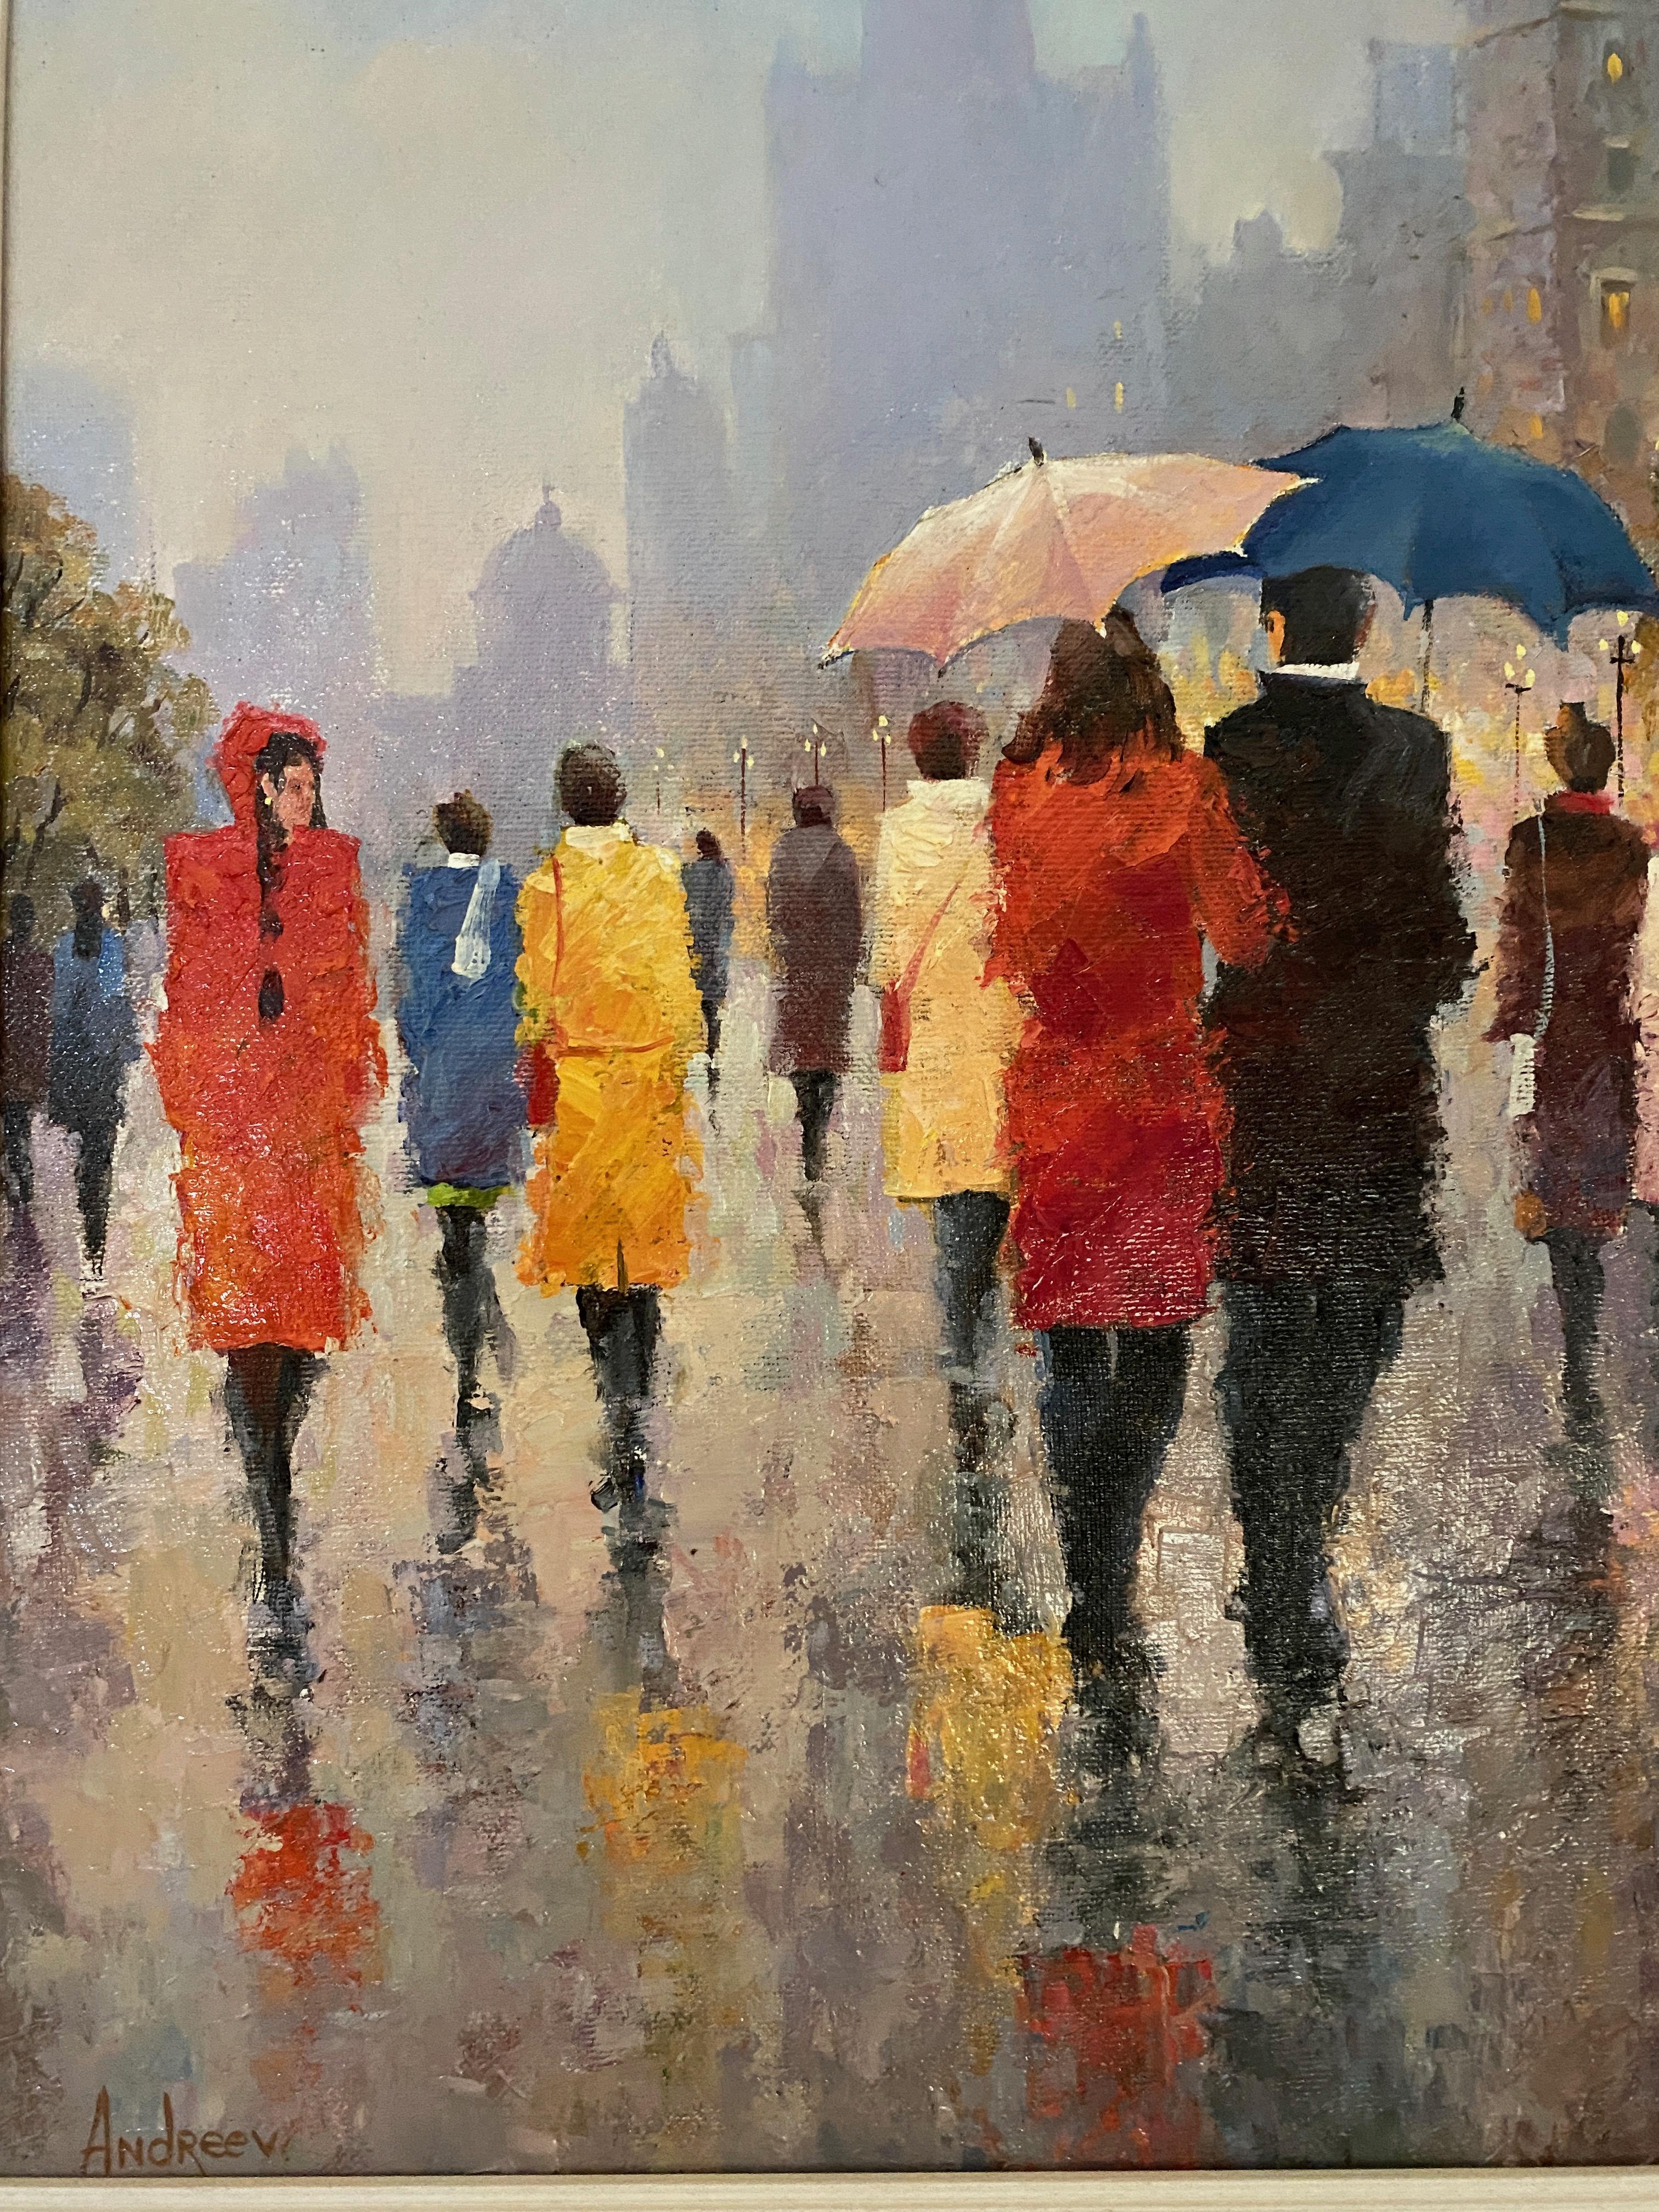 Rainy day. Oil on canvas. Impressionistic colorful street scene. - Painting by Vladimir Andreev